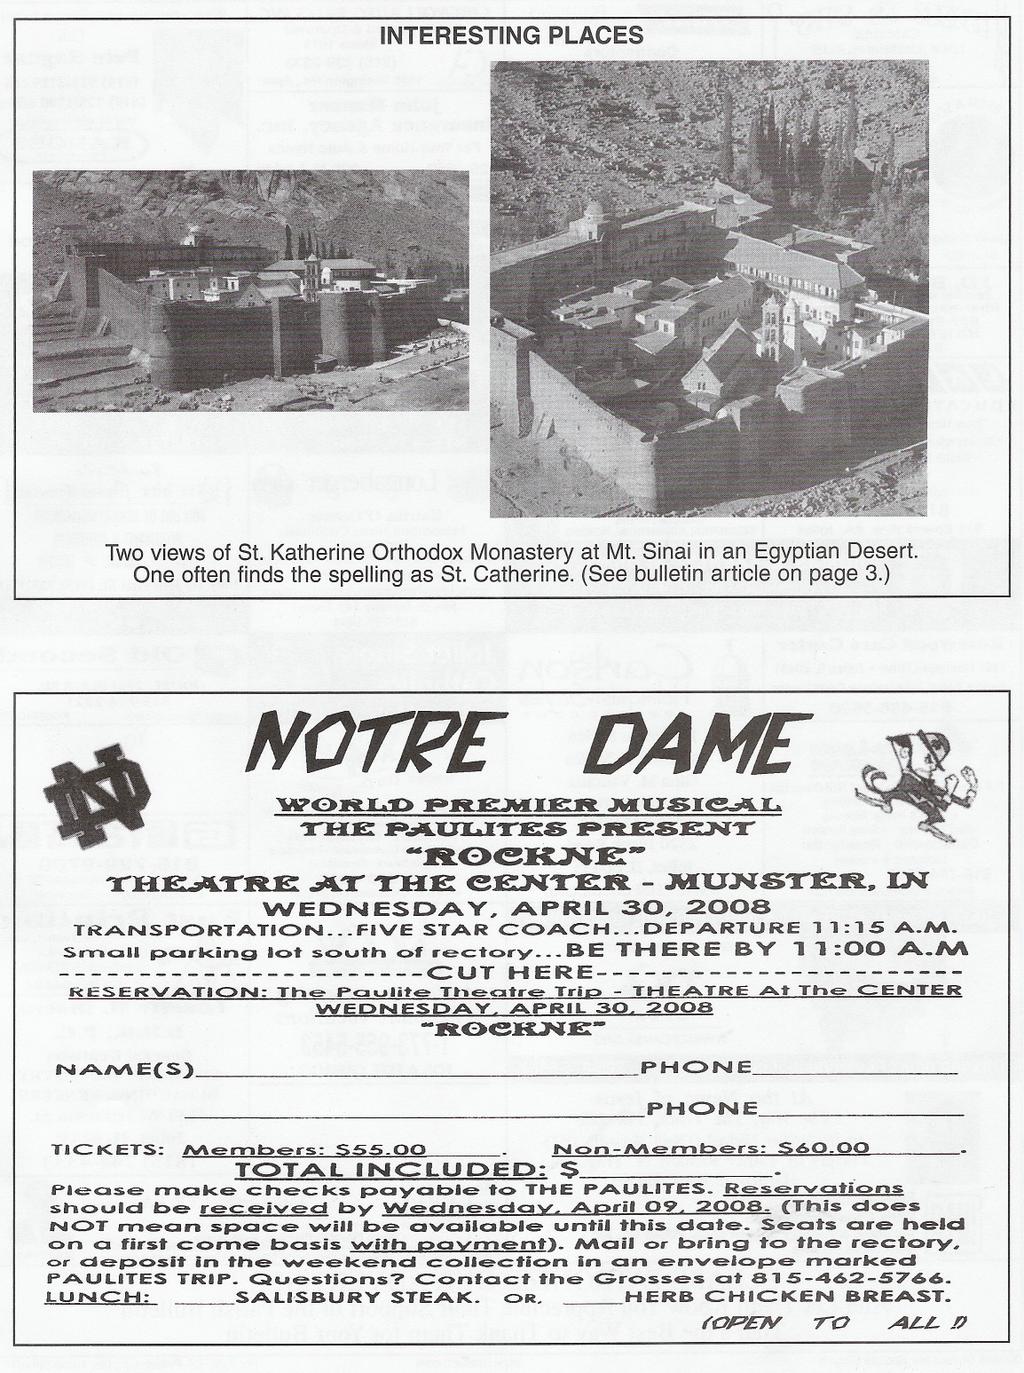 INTERESTING PLACES Two views of St. Katherine Orthodox Monastery at Mt. Sinai in an Egyptian Desert. One often finds the spelling as St. Catherine. (See bulletin article on page 3.) NorRE DANE 'M?